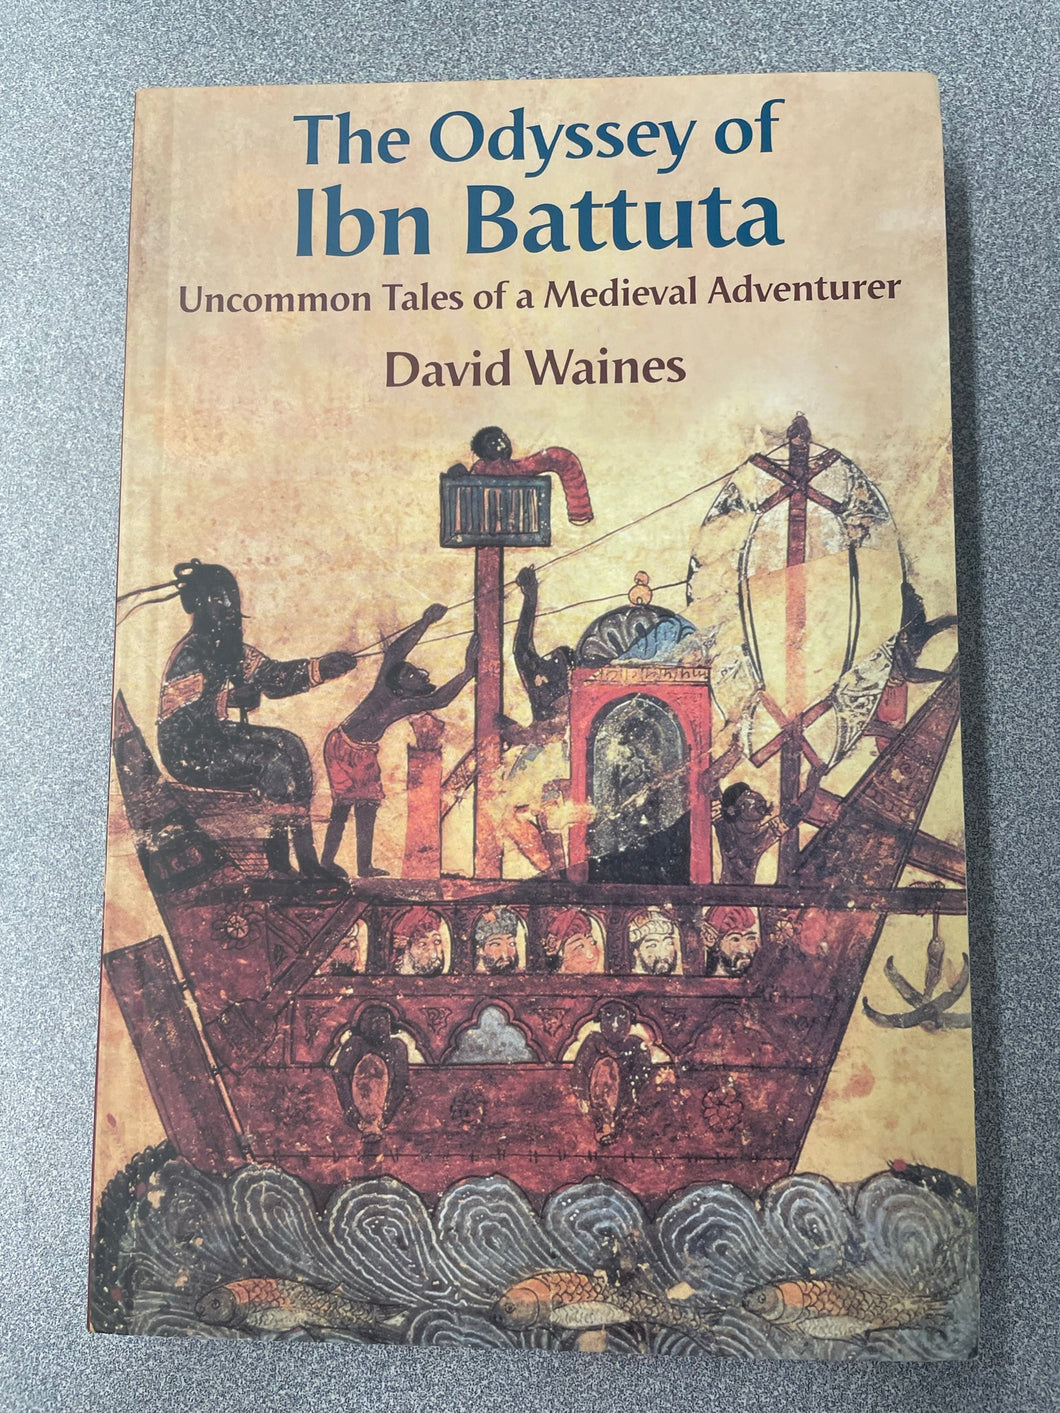 The Odyssey of Ibn Battuta: Uncommon Tales of a Medieval Adventurer, Waines, David [2010] H 4/23